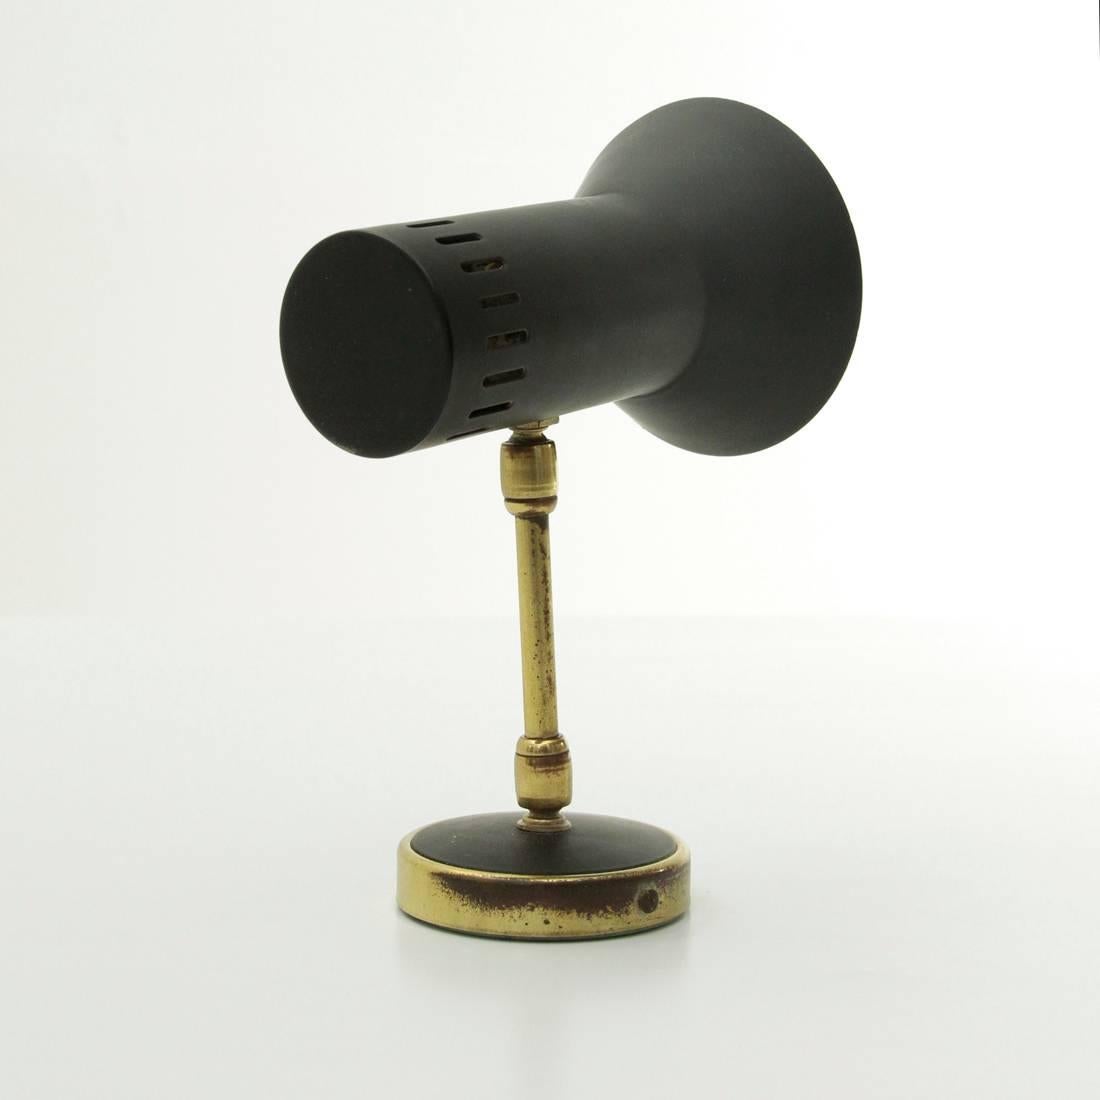 Wall lamp of Italian manufacture produced in the 1950s.
Brass wall plate with black painted metal disc.
Stem with double joint in brass.
Black painted aluminium diffuser.
Good general conditions.

Dimensions: Height 20 cm, depth 13 cm,